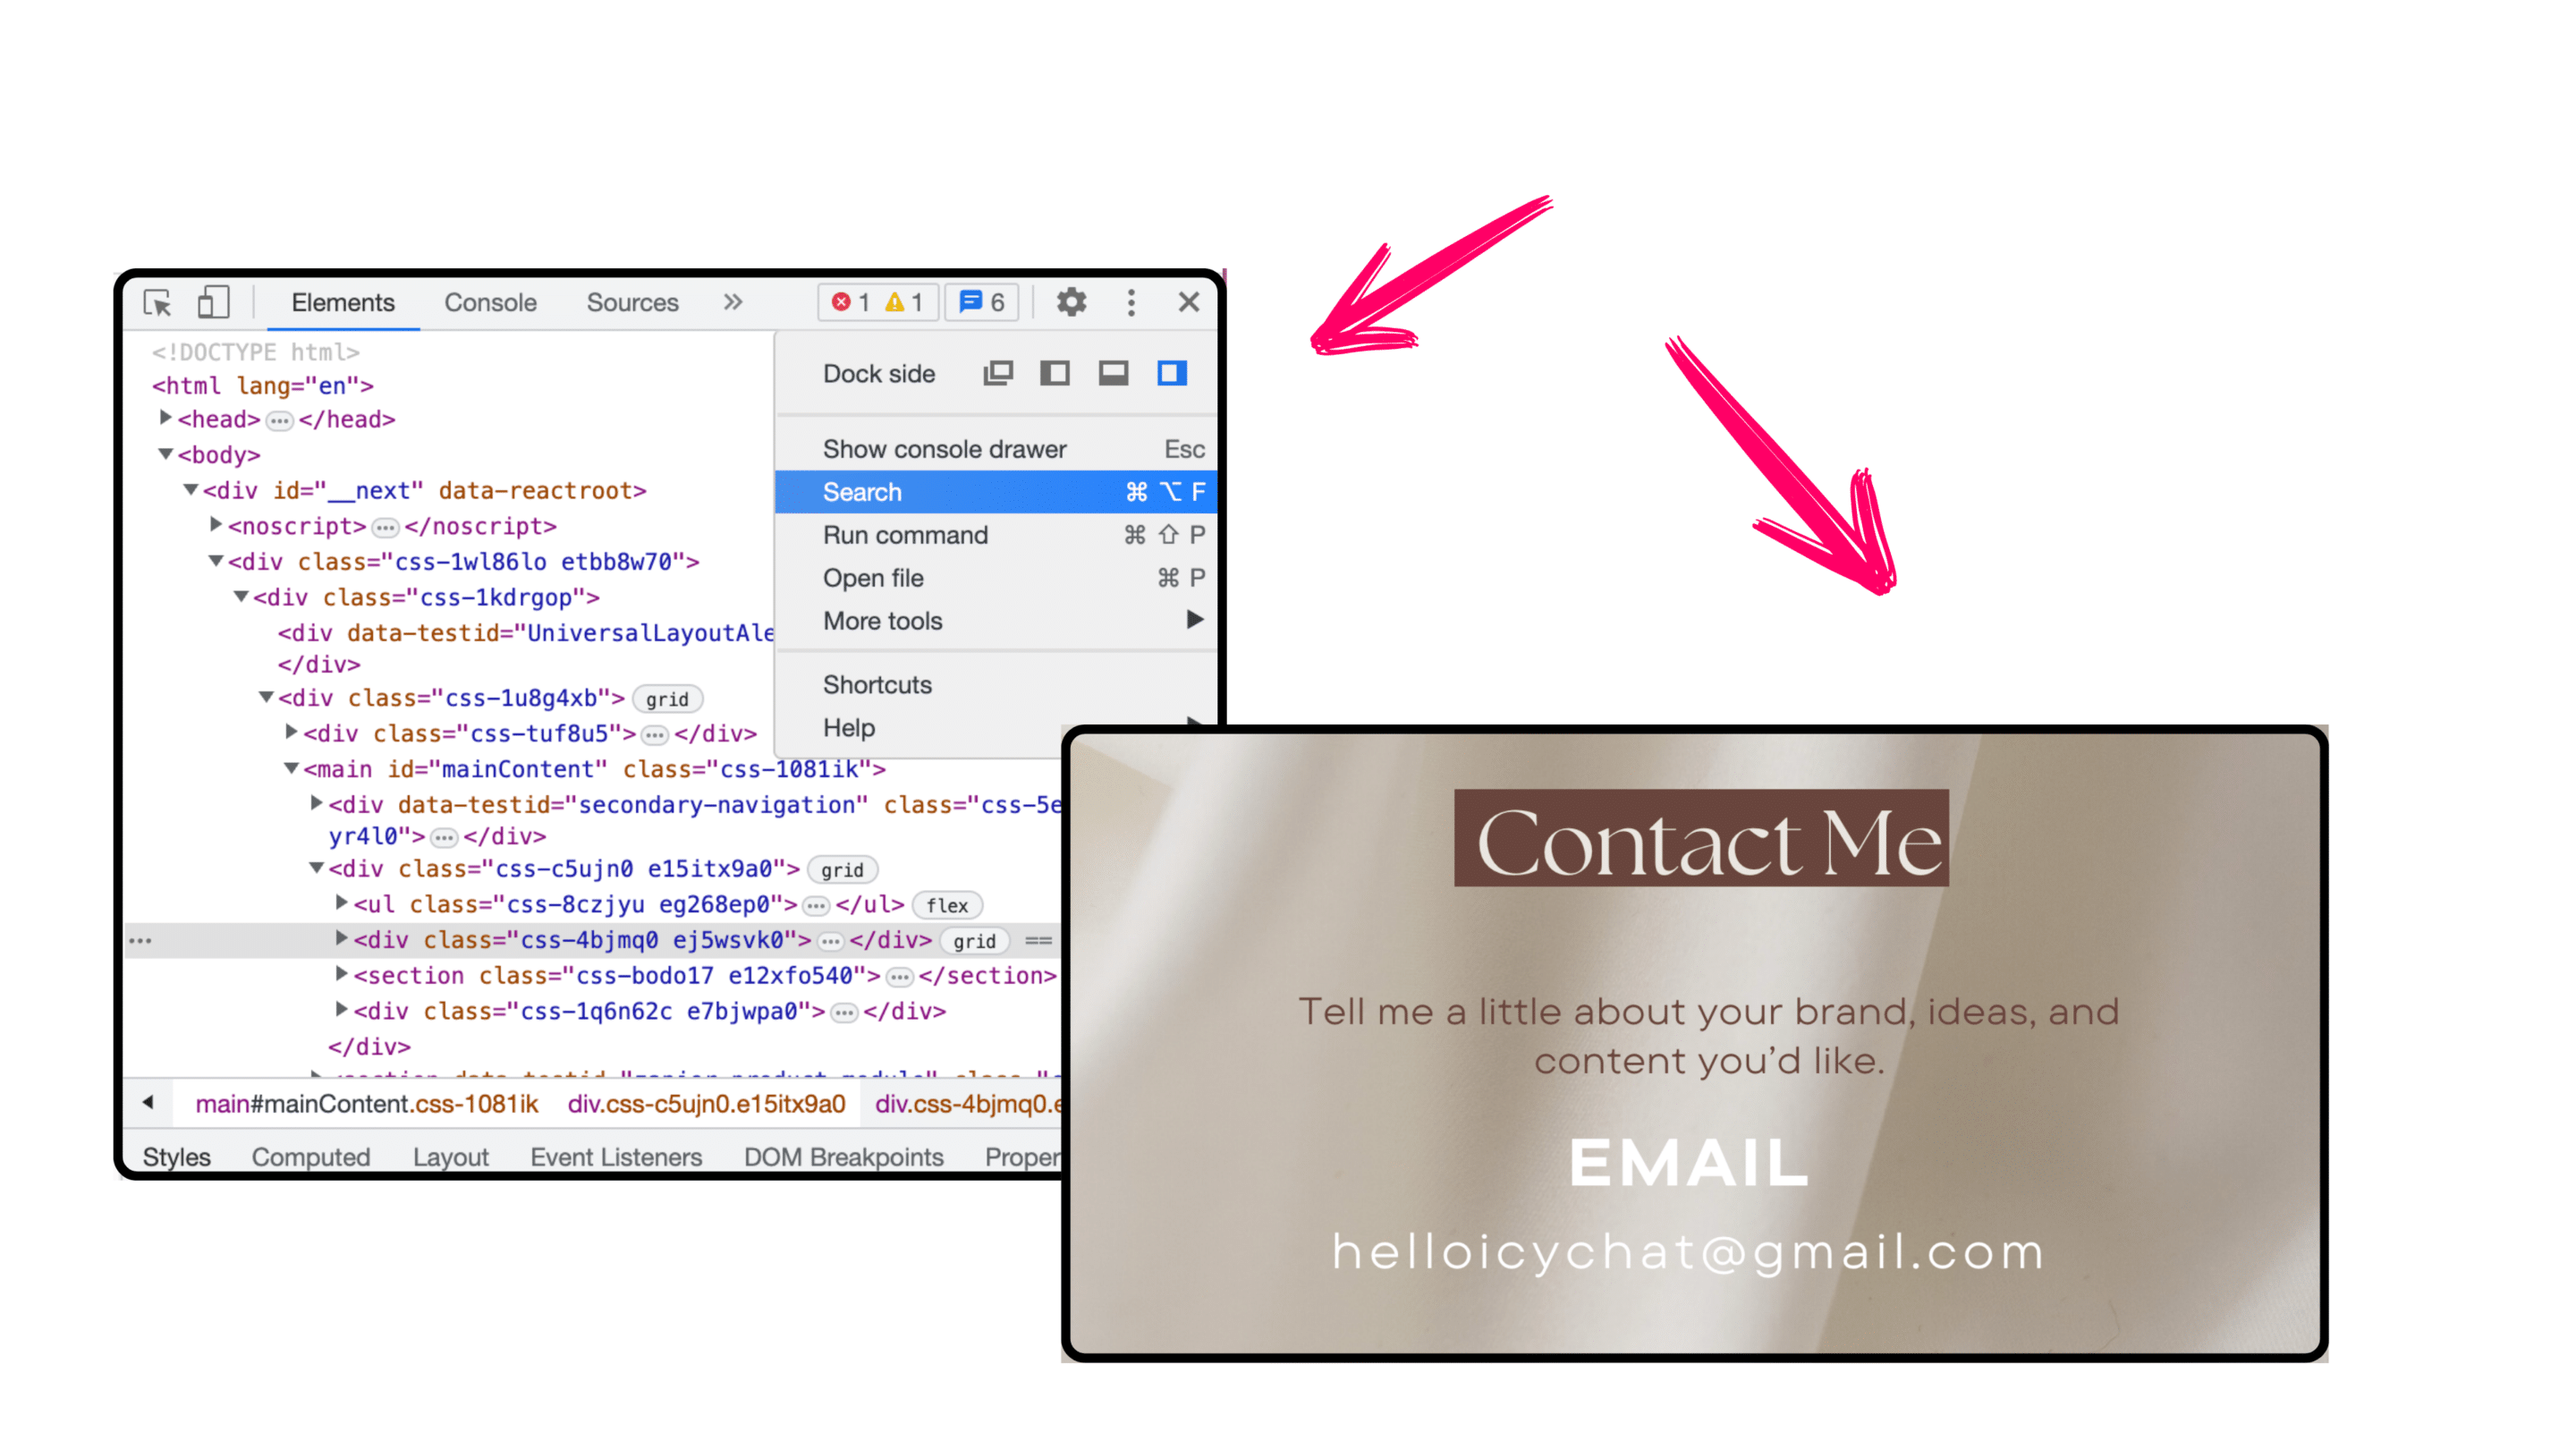 How to create a contact me email in mac os x.